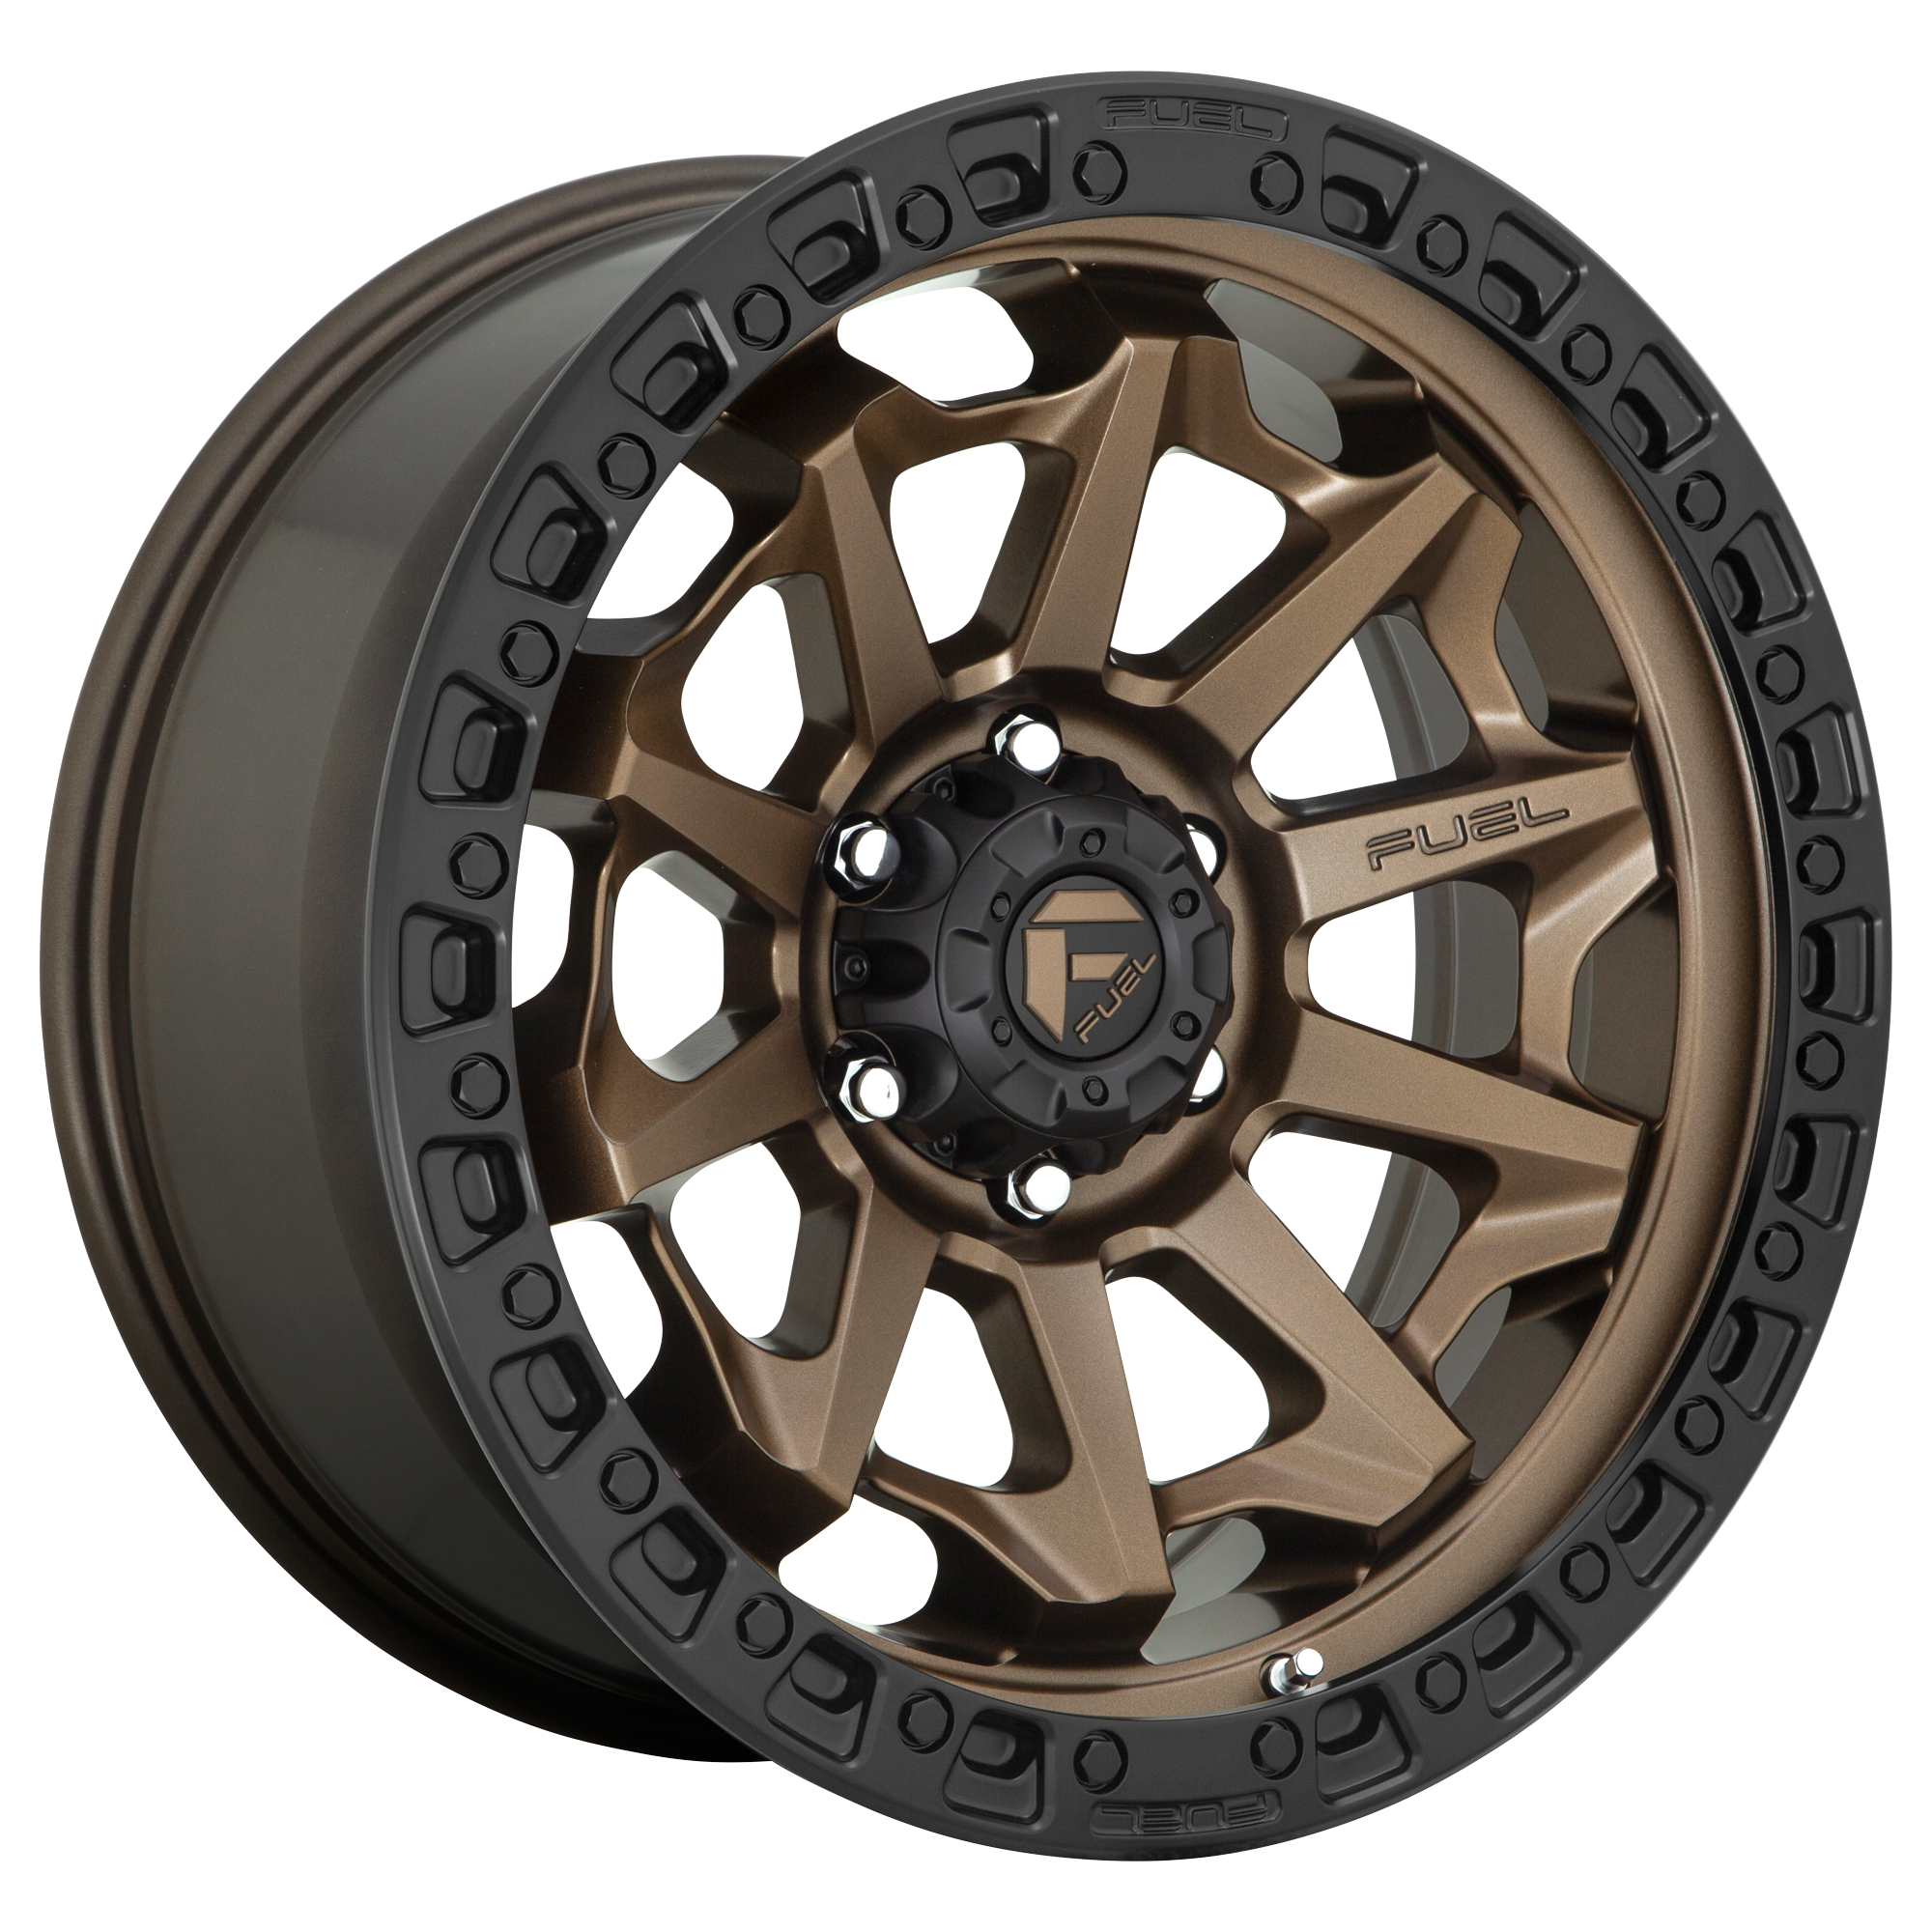 COVERT 20x9 6x135.00 MATTE BRONZE BLACK BEAD RING (1 mm) - Tires and Engine Performance